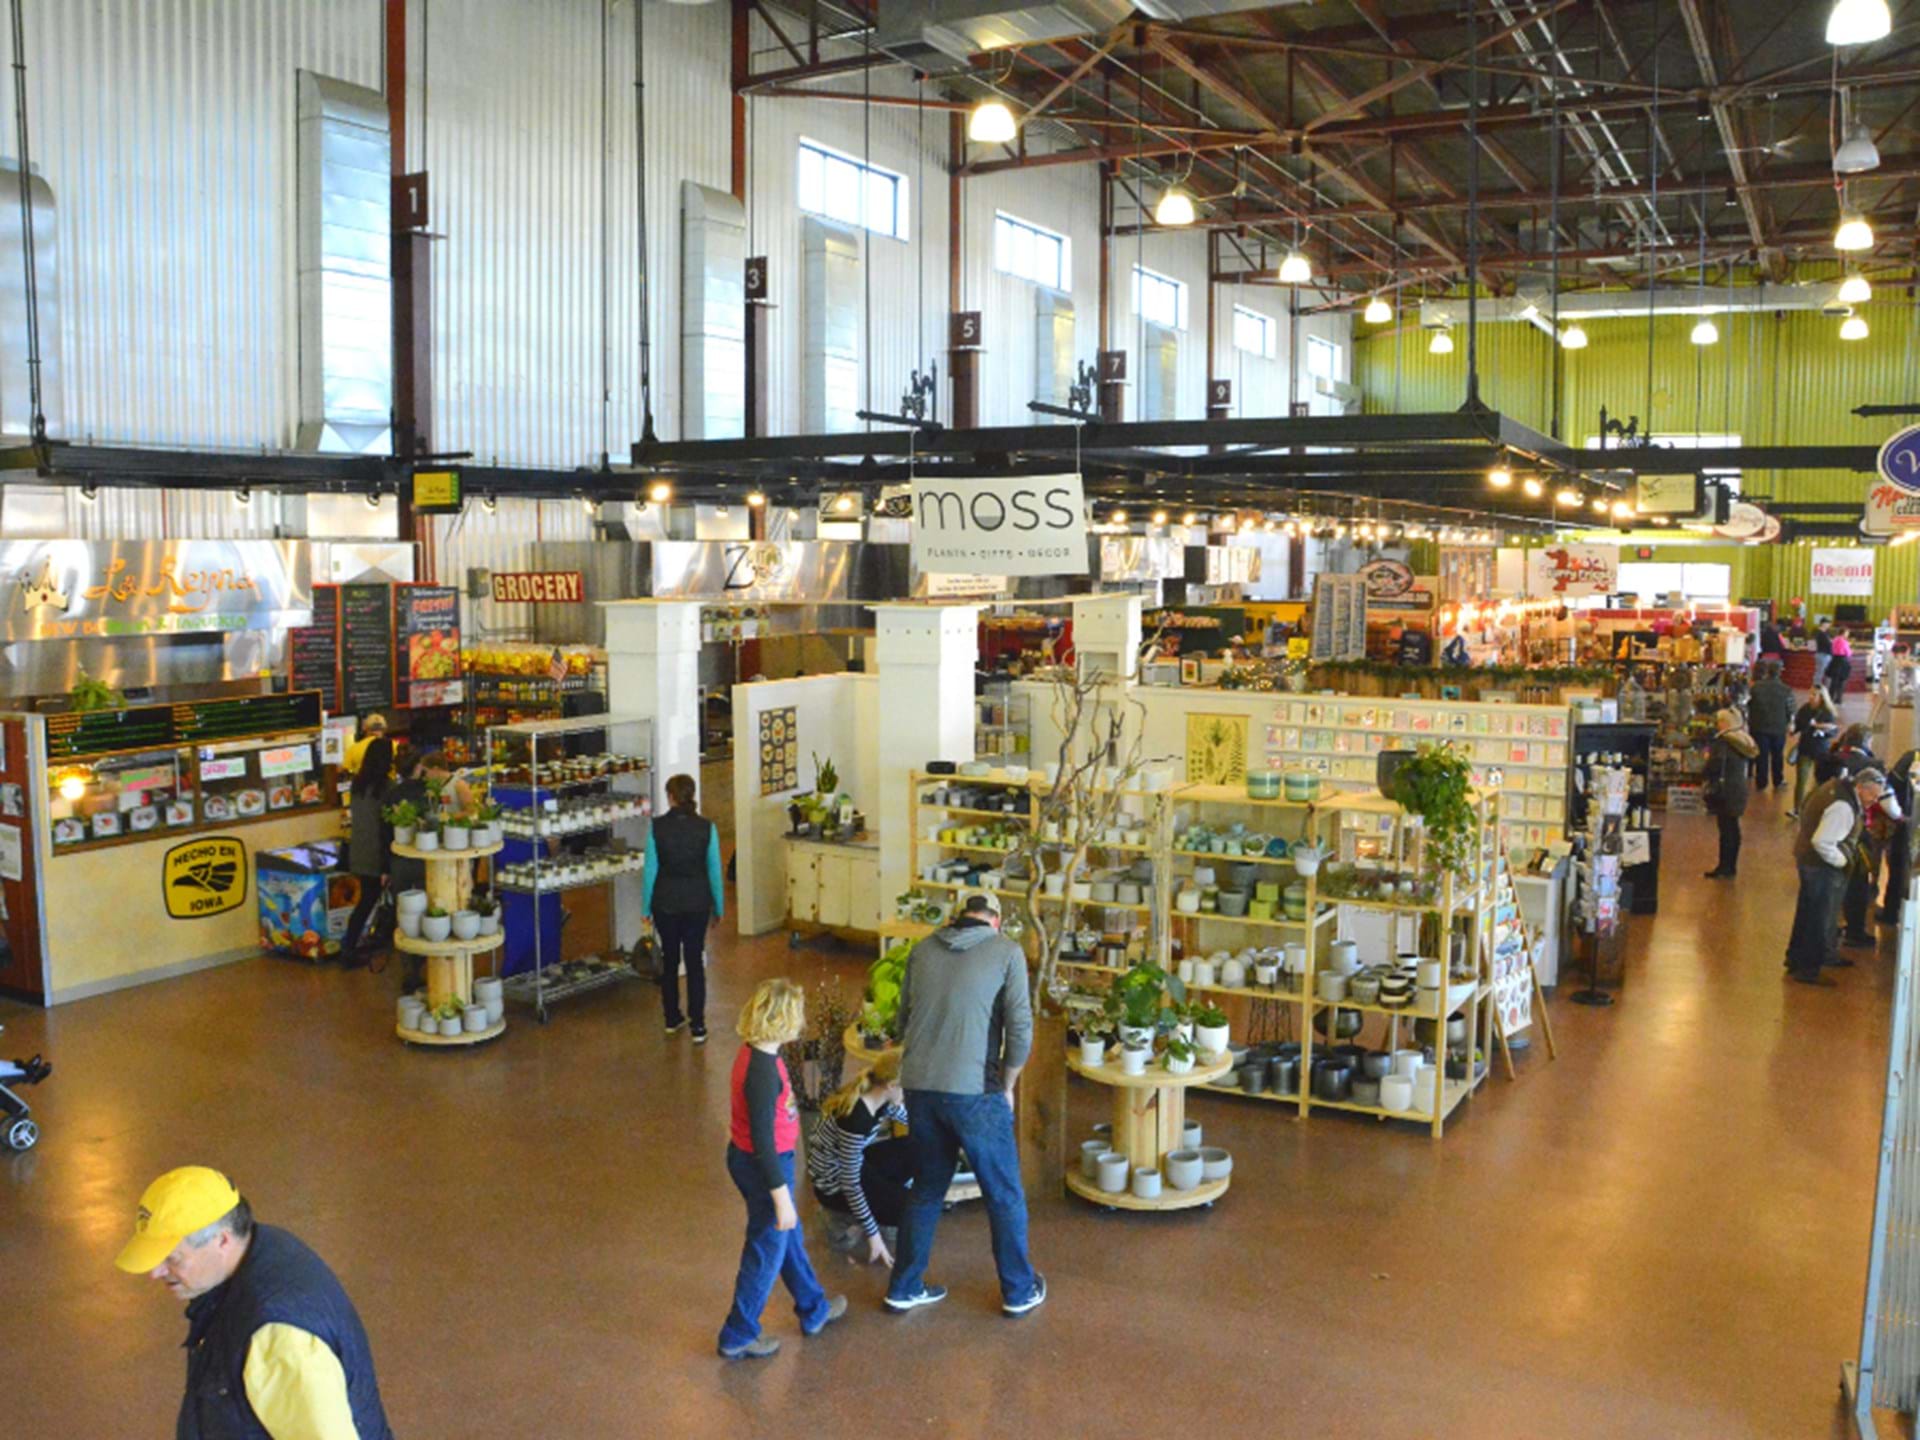 NewBo City Market is a business incubator to over 25 small businesses. 